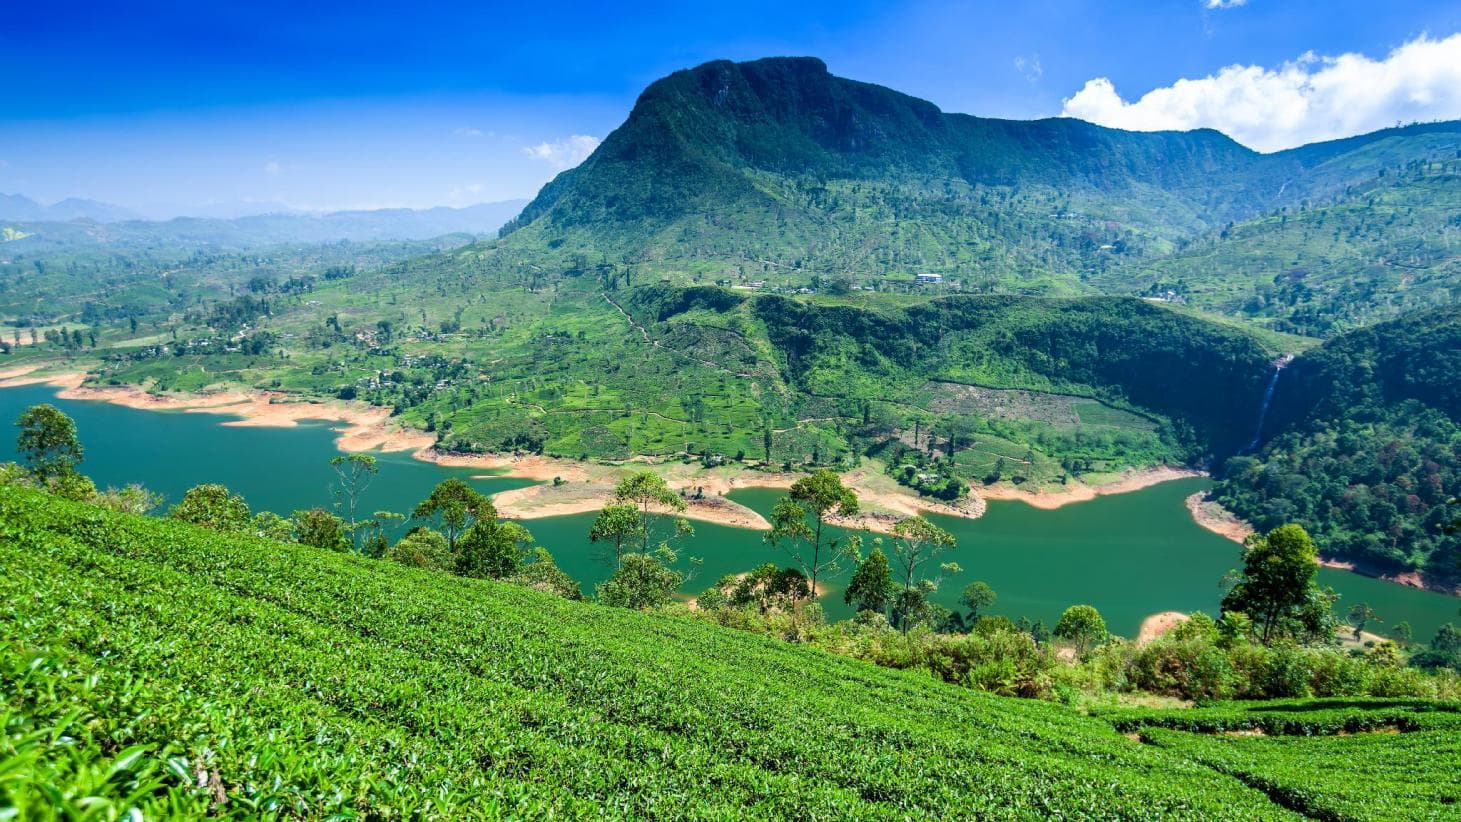 The beautiful view of the countryside mountain ranges, Sri Lanka.